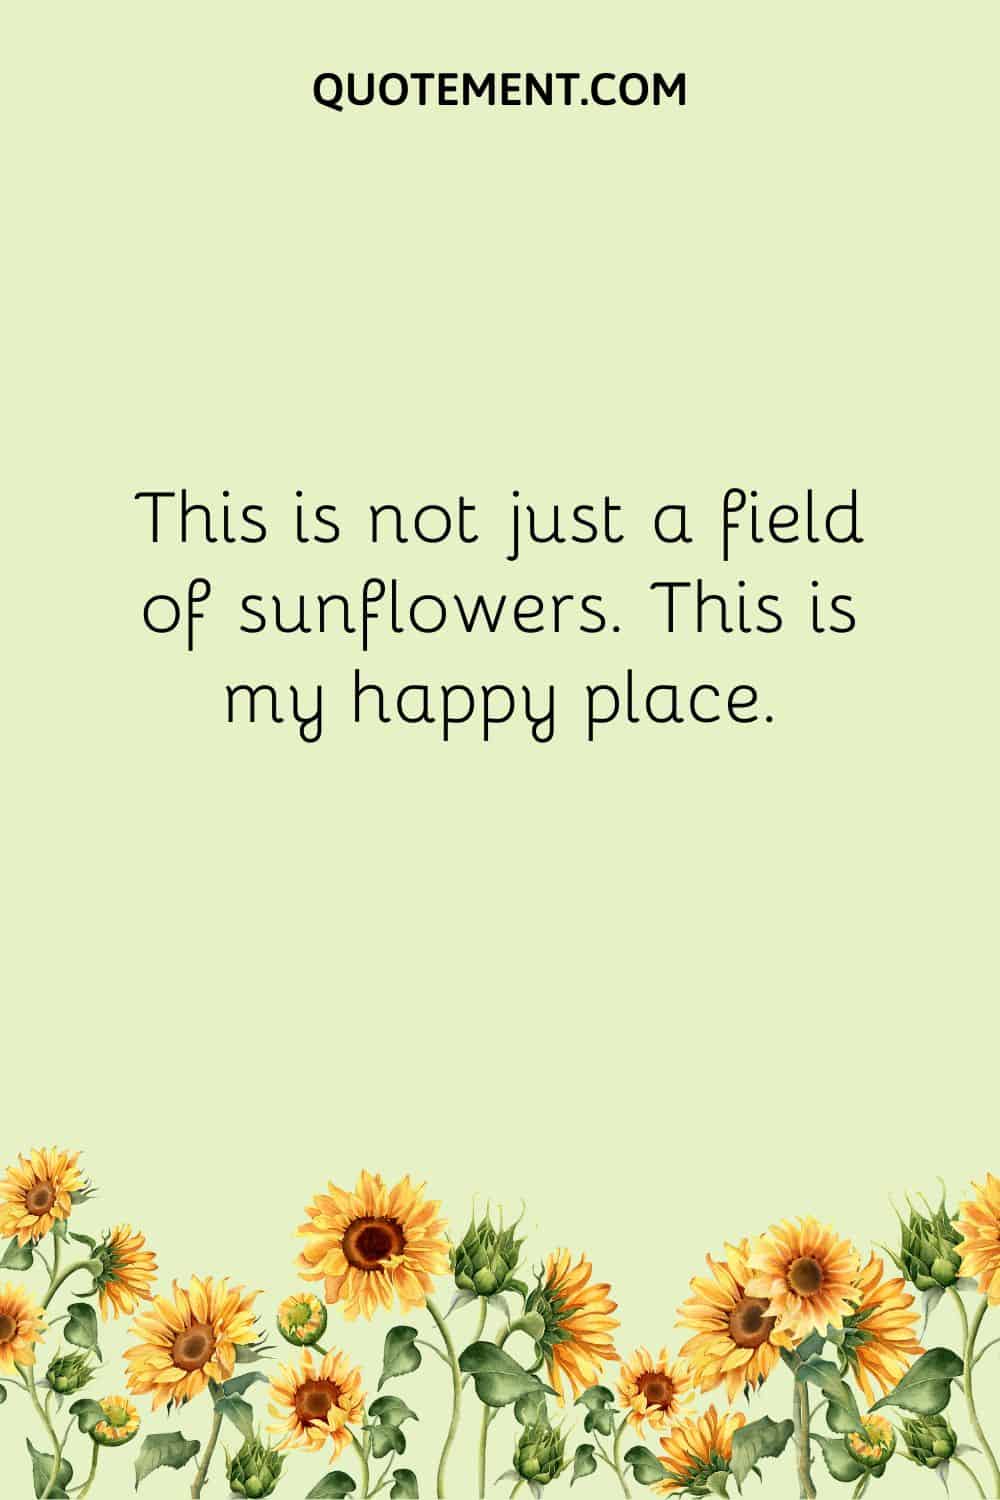 This is not just a field of sunflowers. This is my happy place.